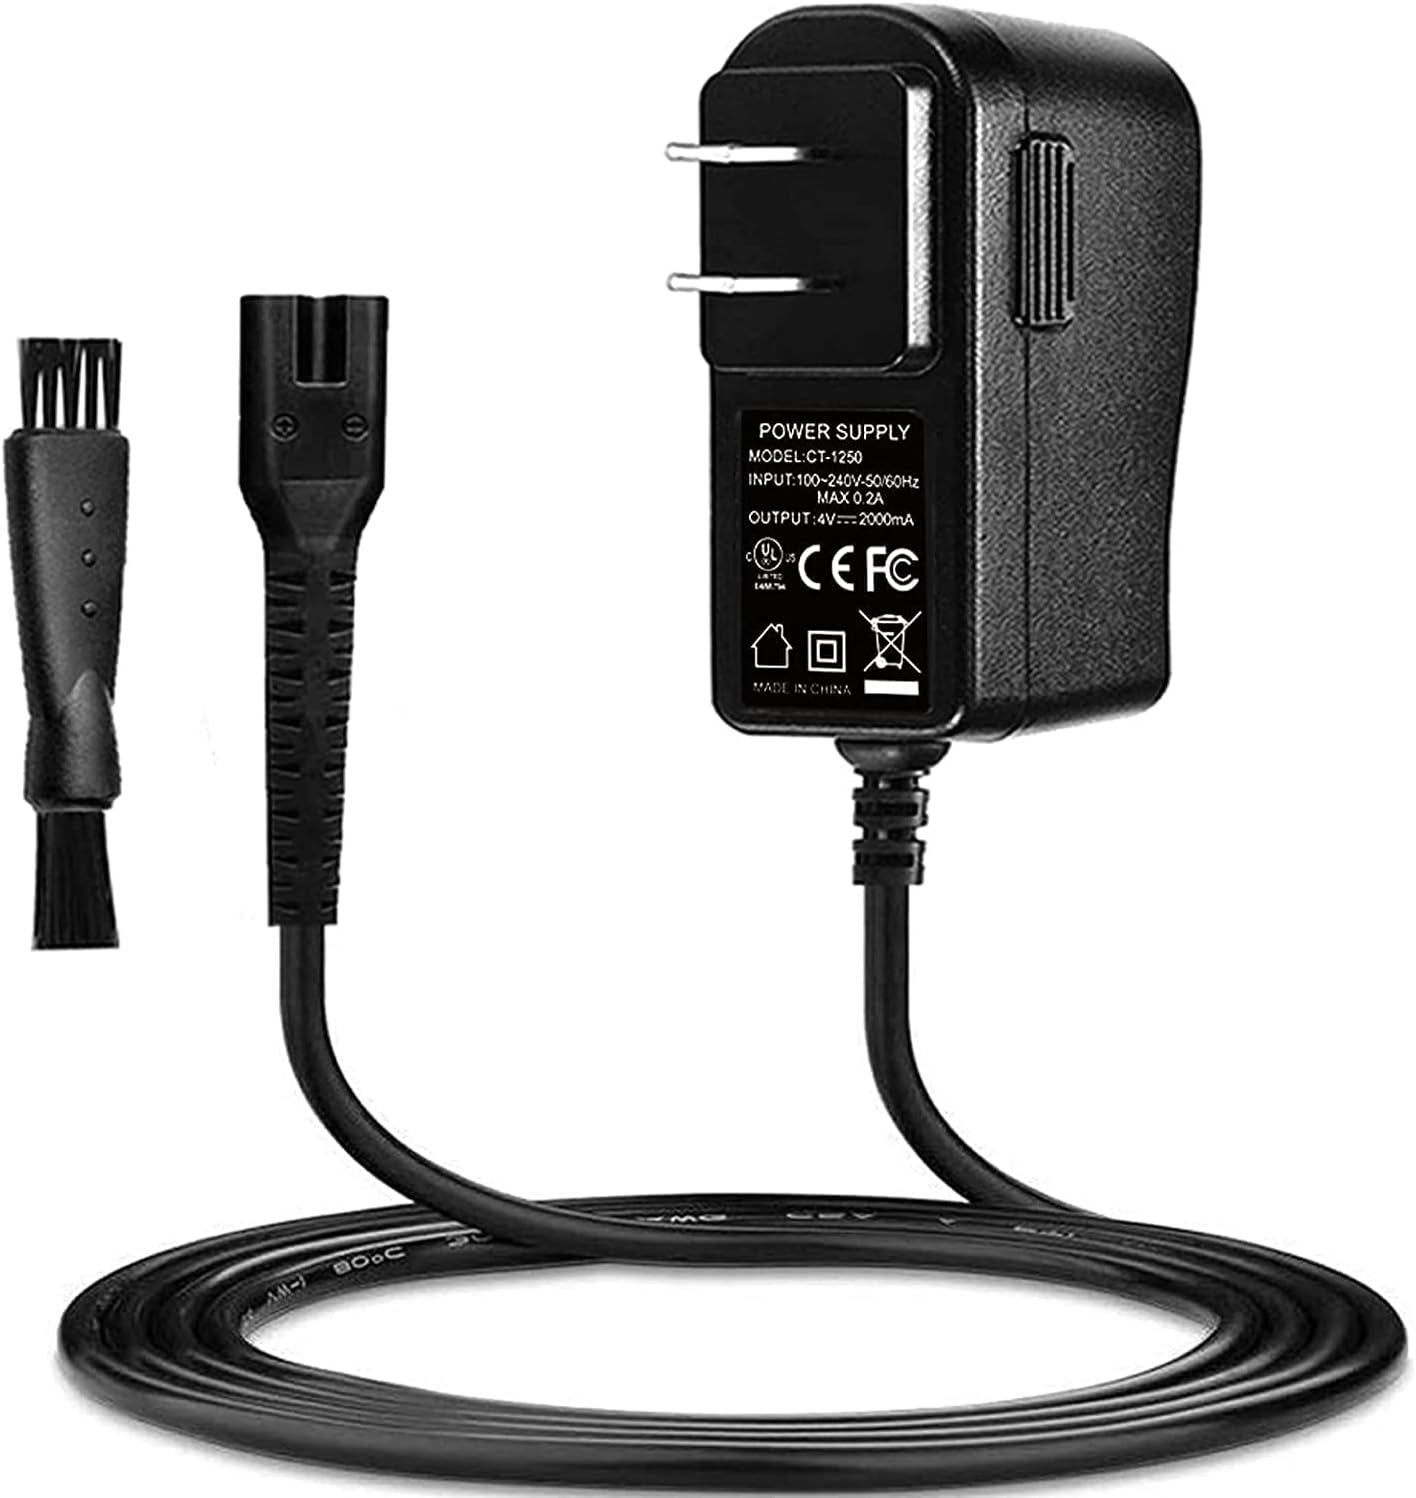 *Brand NEW*4V Clipper Charger Compatible with Wahl 8164/8591/8148/8504, 5-Star Magic Clip Cordless Trimmer, 19